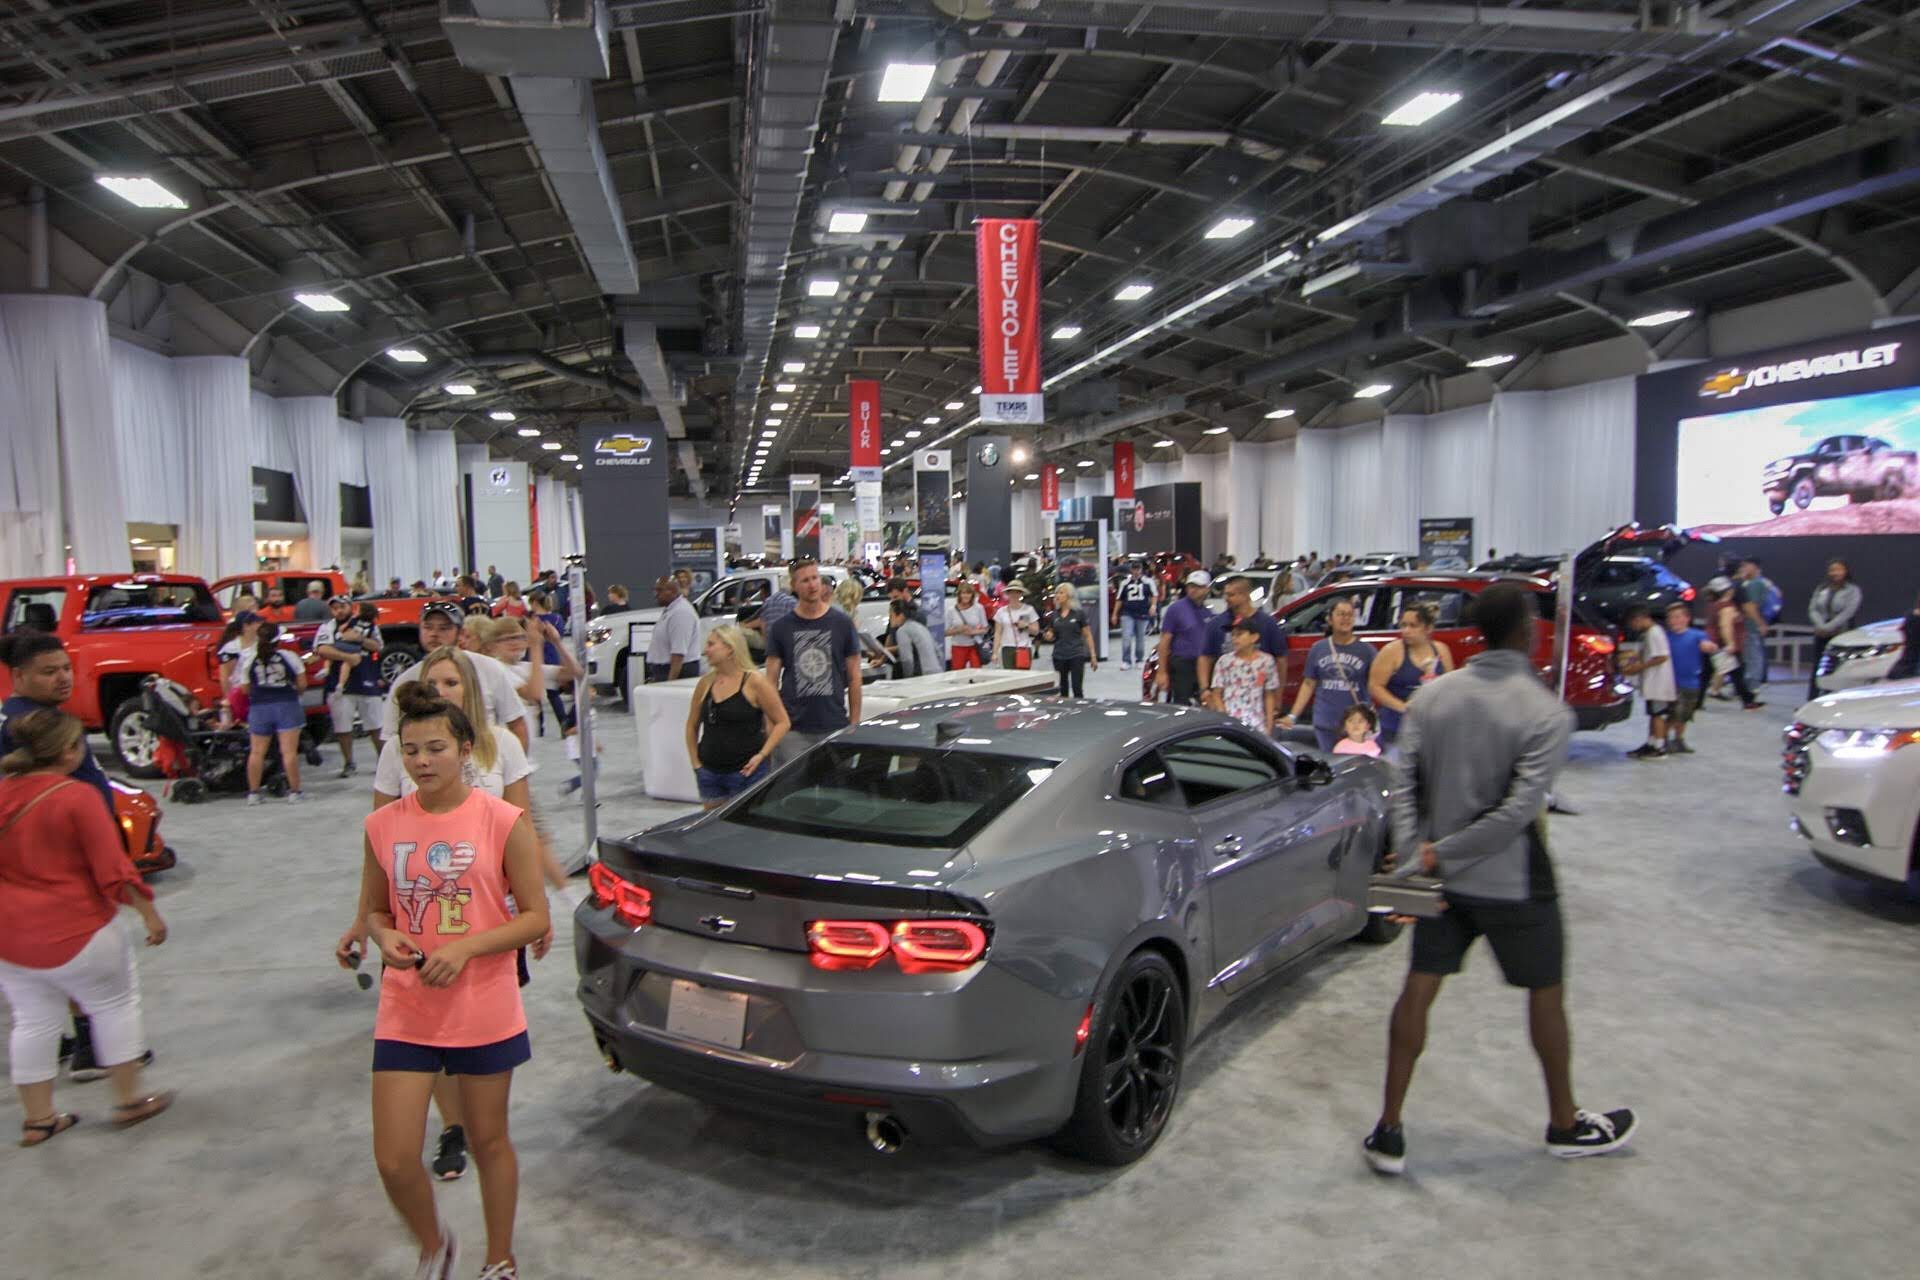 2018 Auto Lineup Unveiled for the Texas Auto Show at the State Fair of